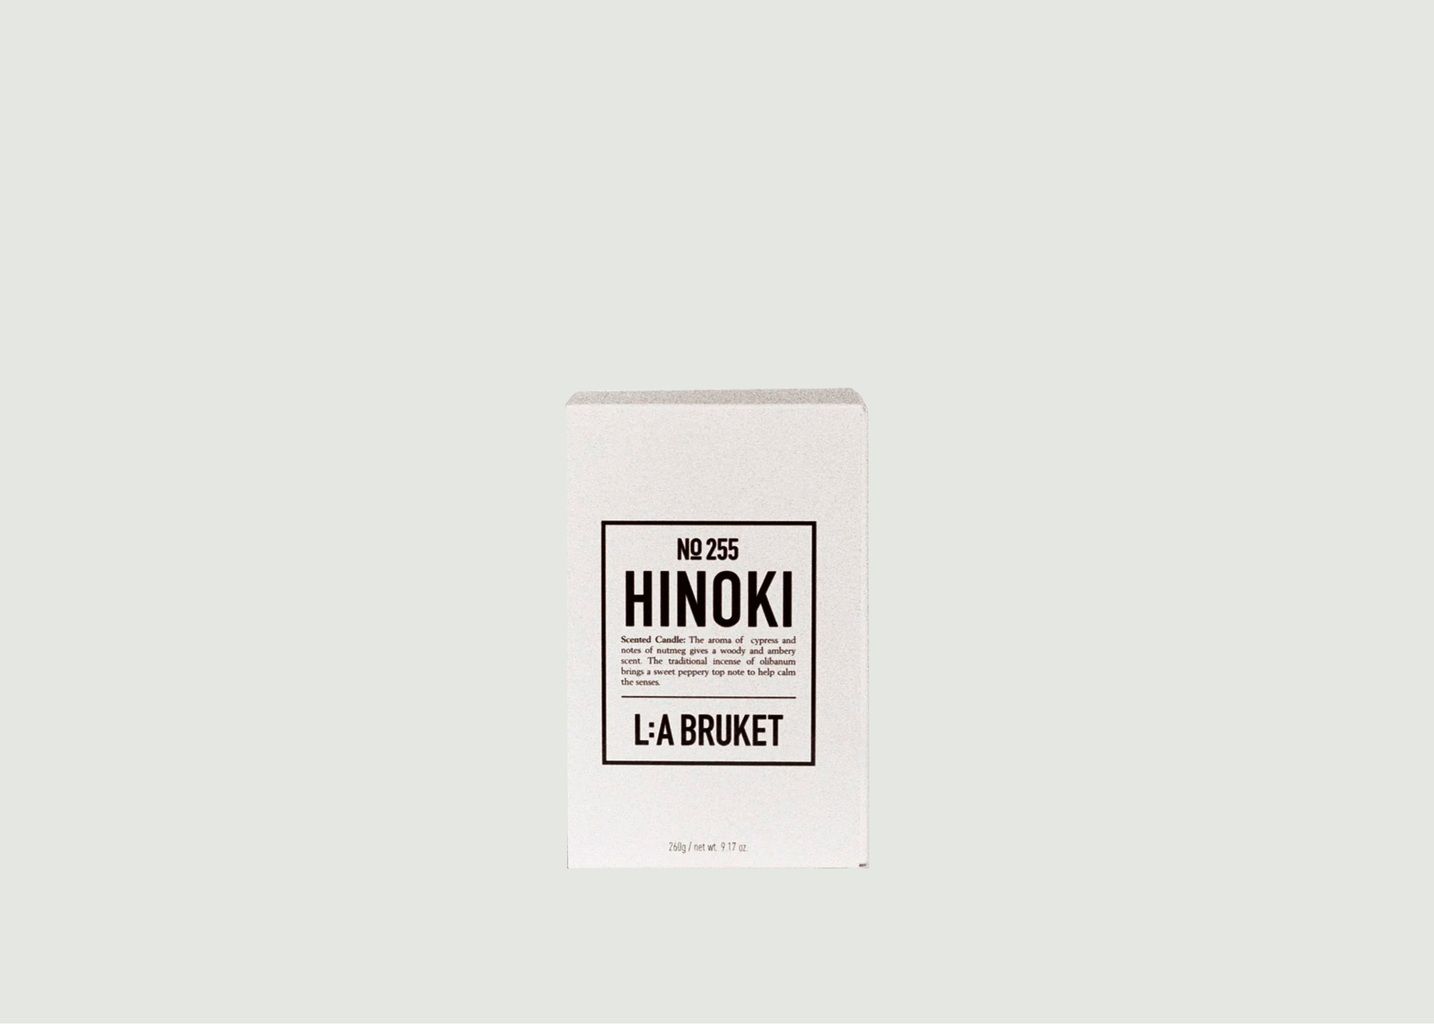 Hinoki Scented Candle 260g - L:A Bruket